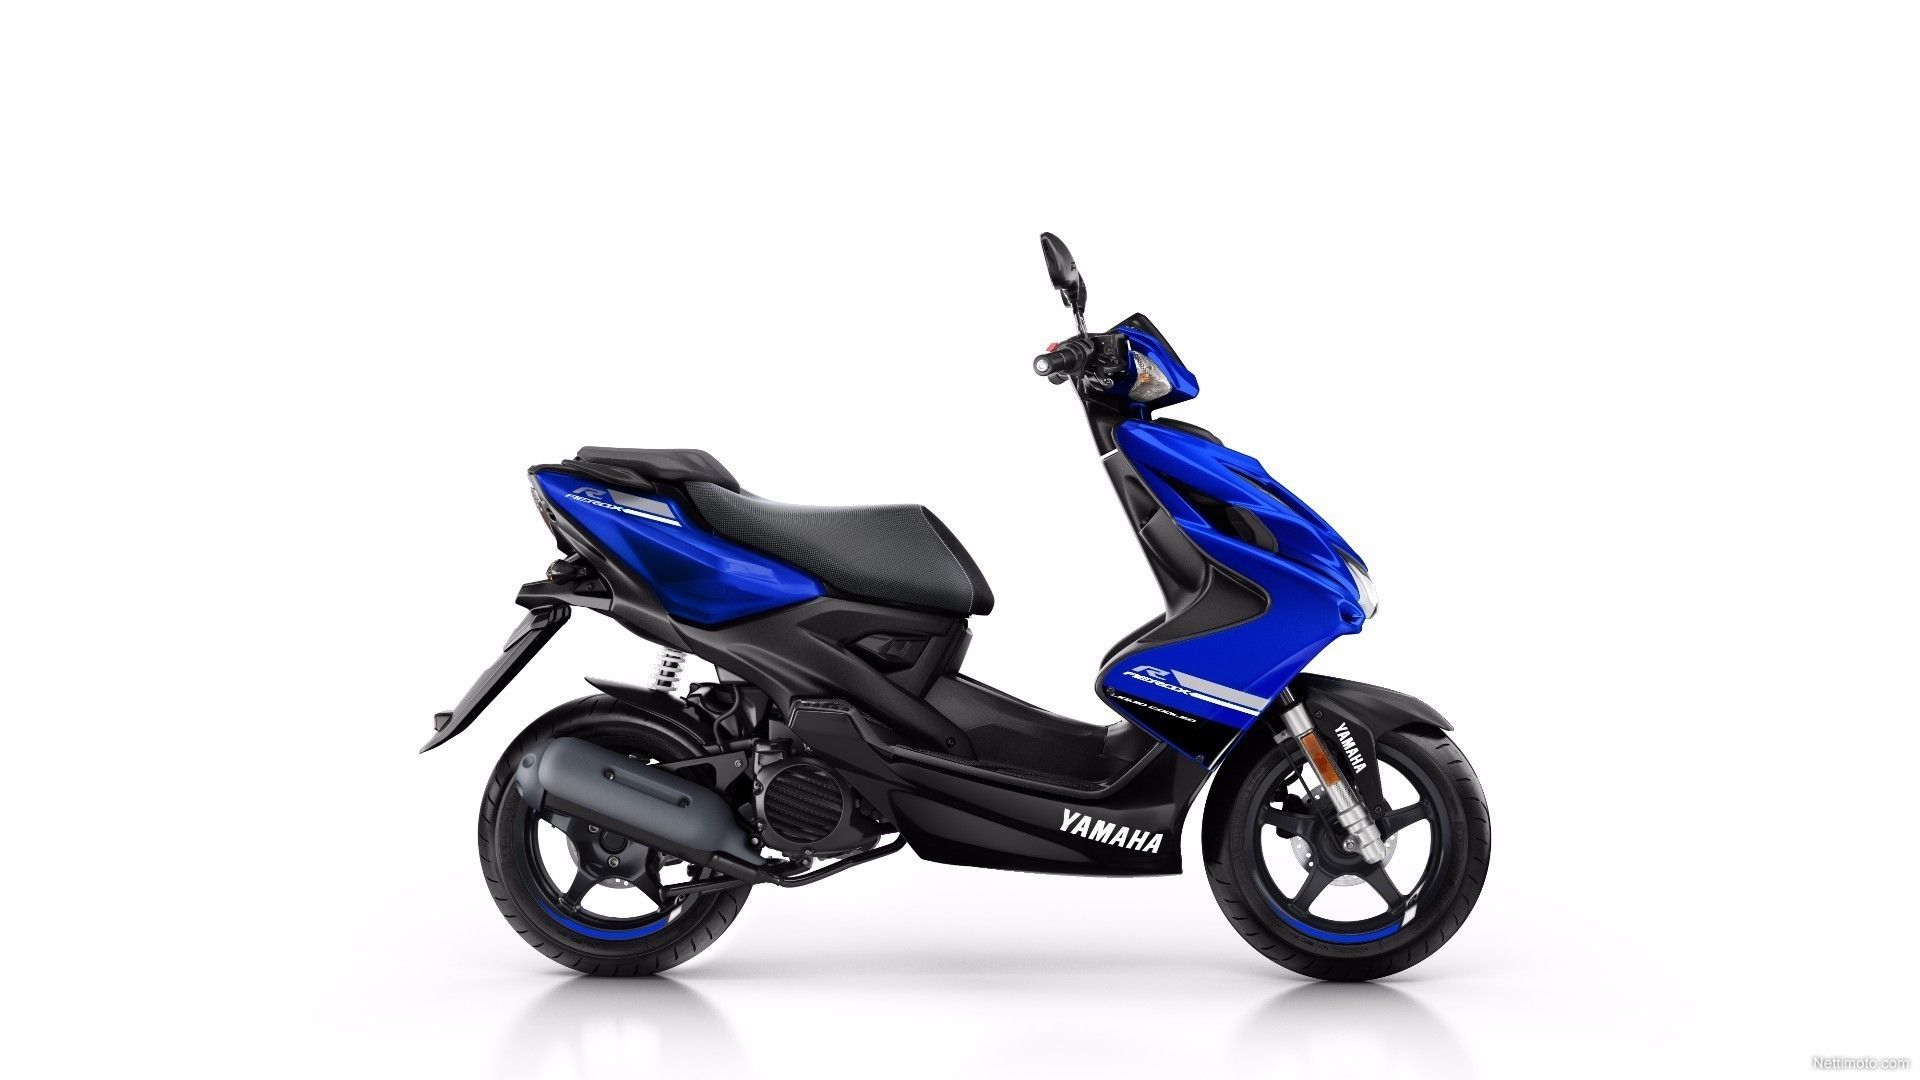 Yamaha Aerox 155 the performance scooter come to India